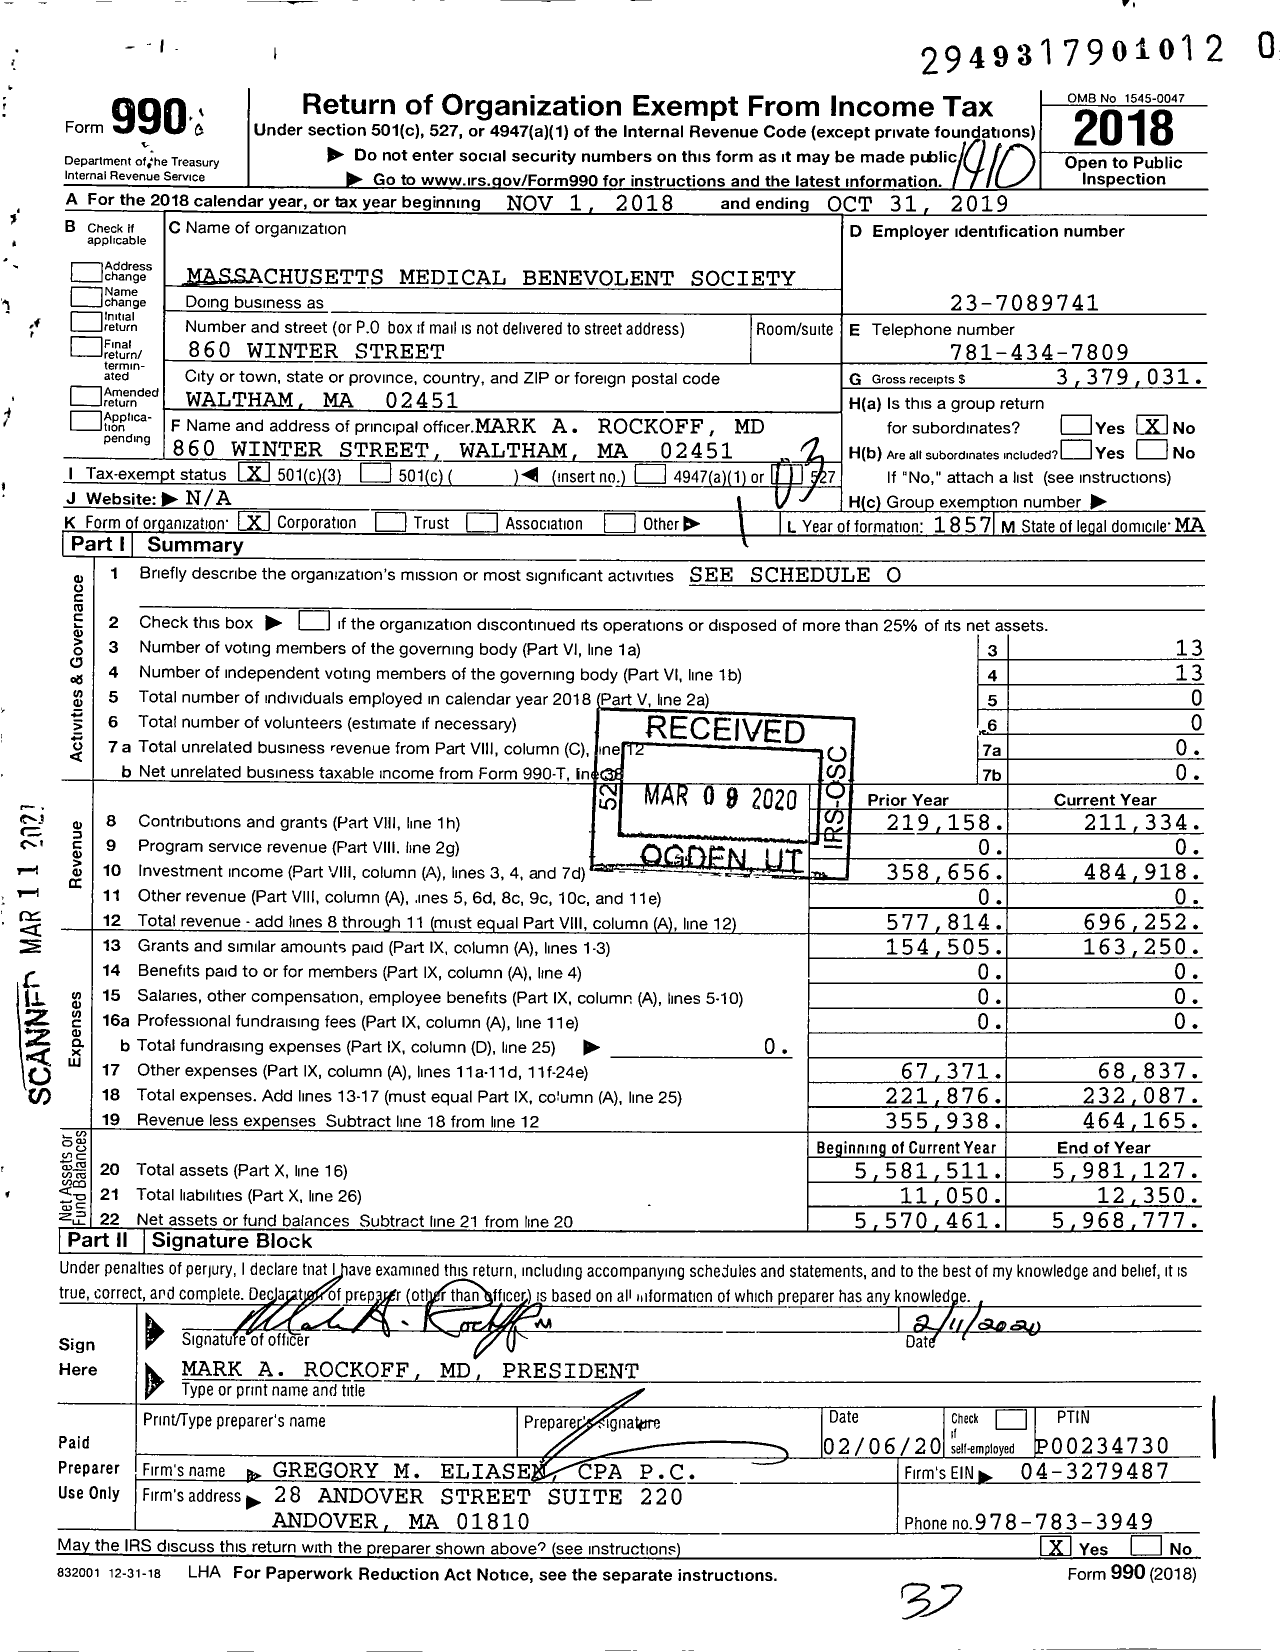 Image of first page of 2018 Form 990 for Massachusetts Medical Benevolent Society